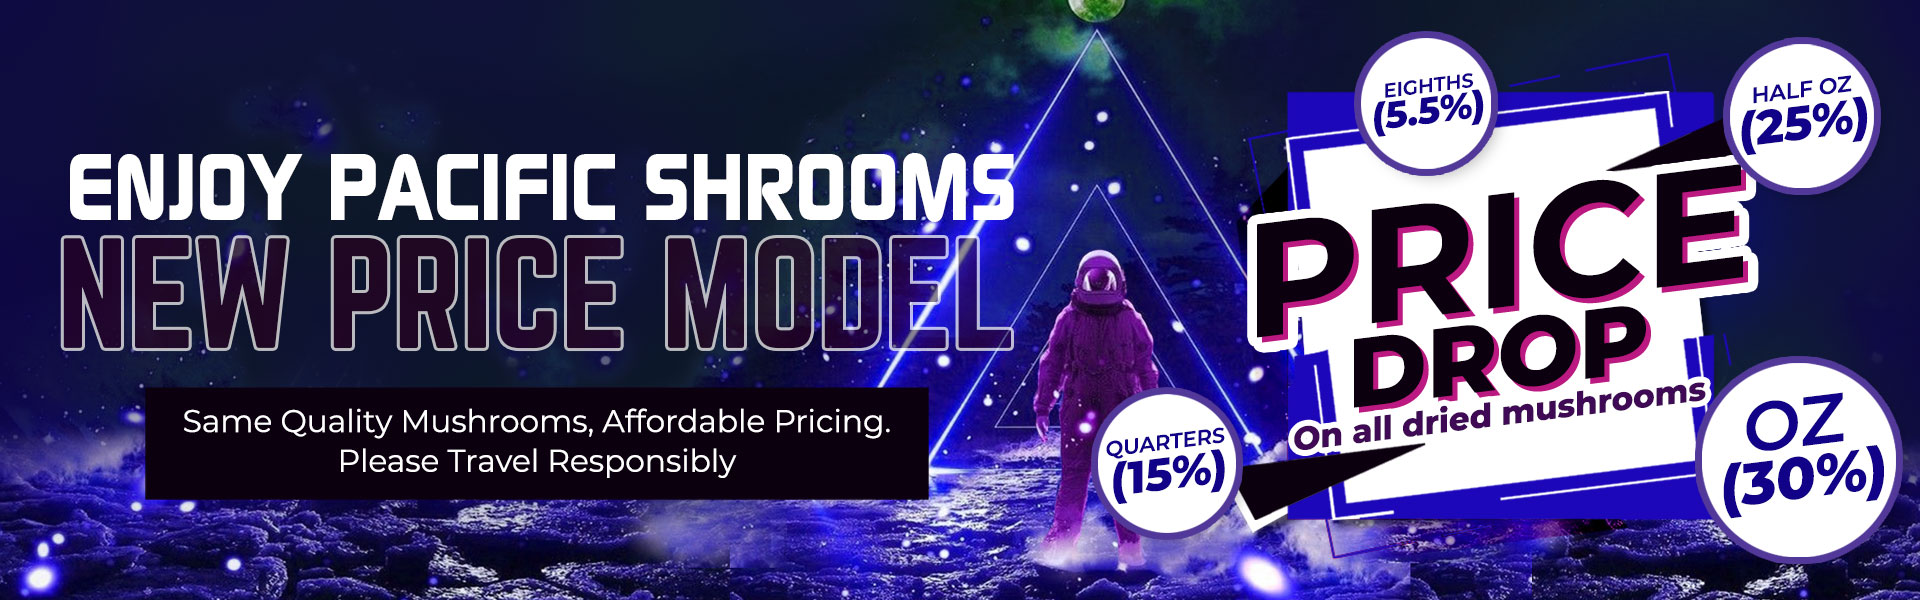 Ps Enjoy Pacific Shrooms New Price Model 1920x600 1 Final